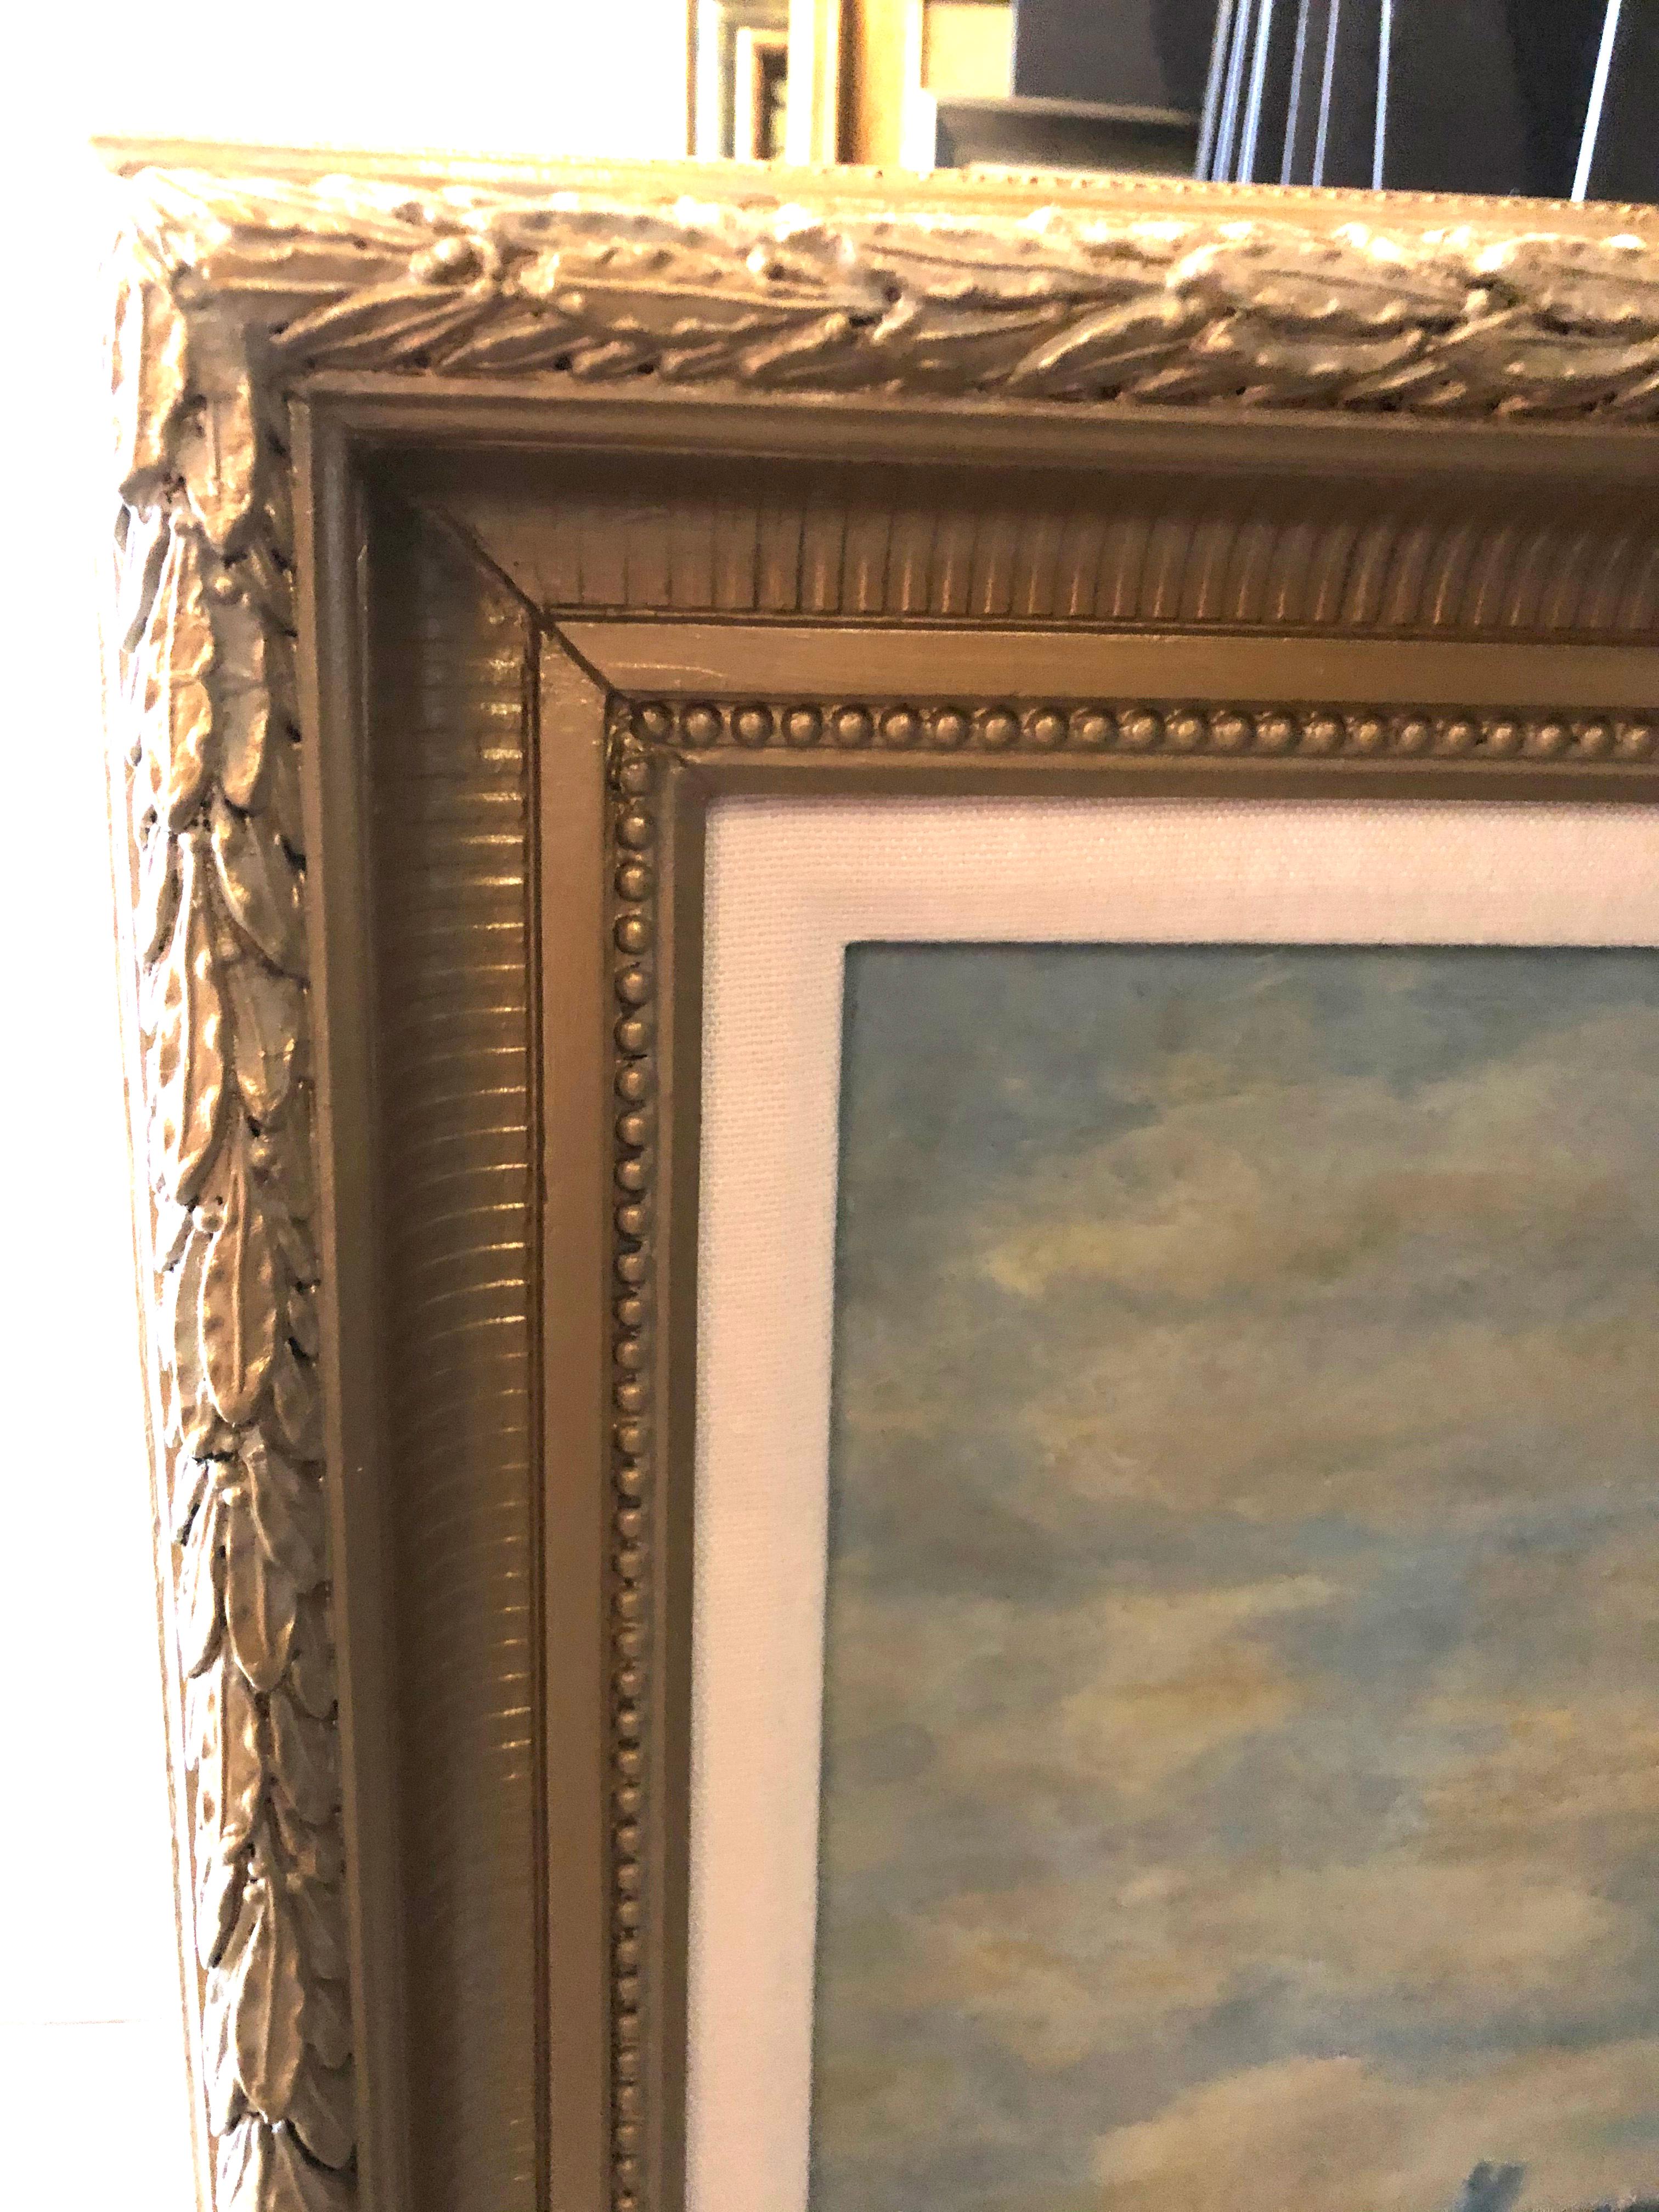 This 19th c. classically realistic oil on canvas painting depicts the majesty of a large sailing vessel on the sea against a light blue sky filled with white cumulus clouds. A gentle wind creates white seafoam as the waves break against the bow of